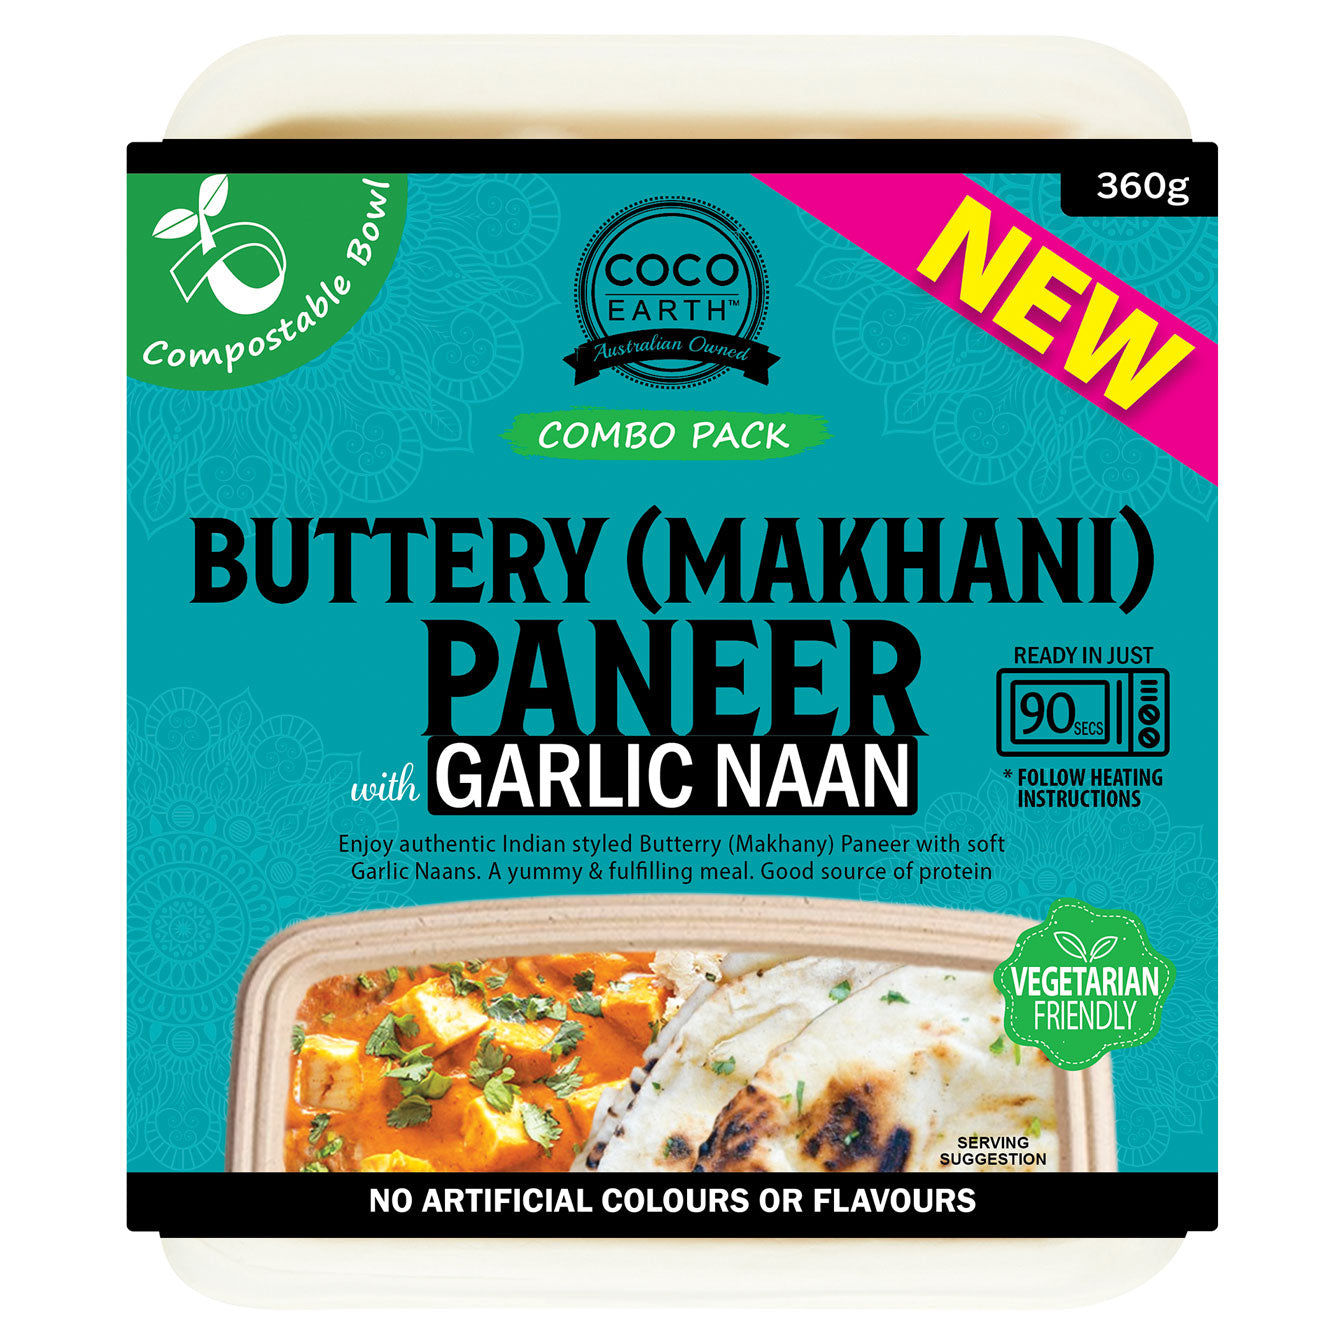 Buttery (Makhani) Paneer with Garlic Naan 360g (Compostable Bowl)